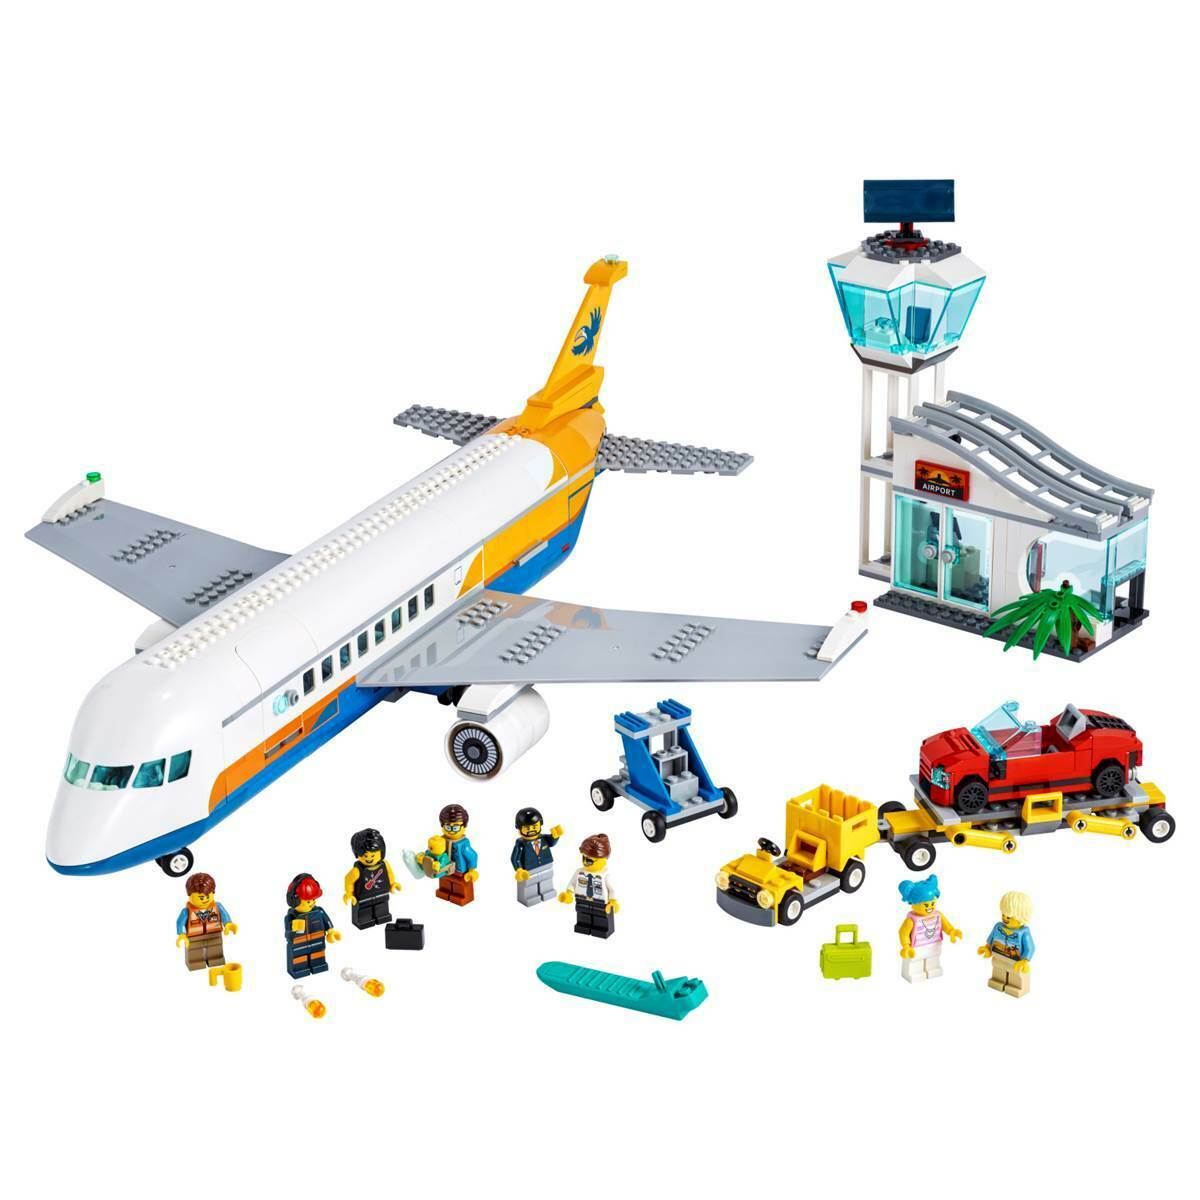 LEGO City Passenger Airplane 60262 Building Toy for Kids 669 Pieces